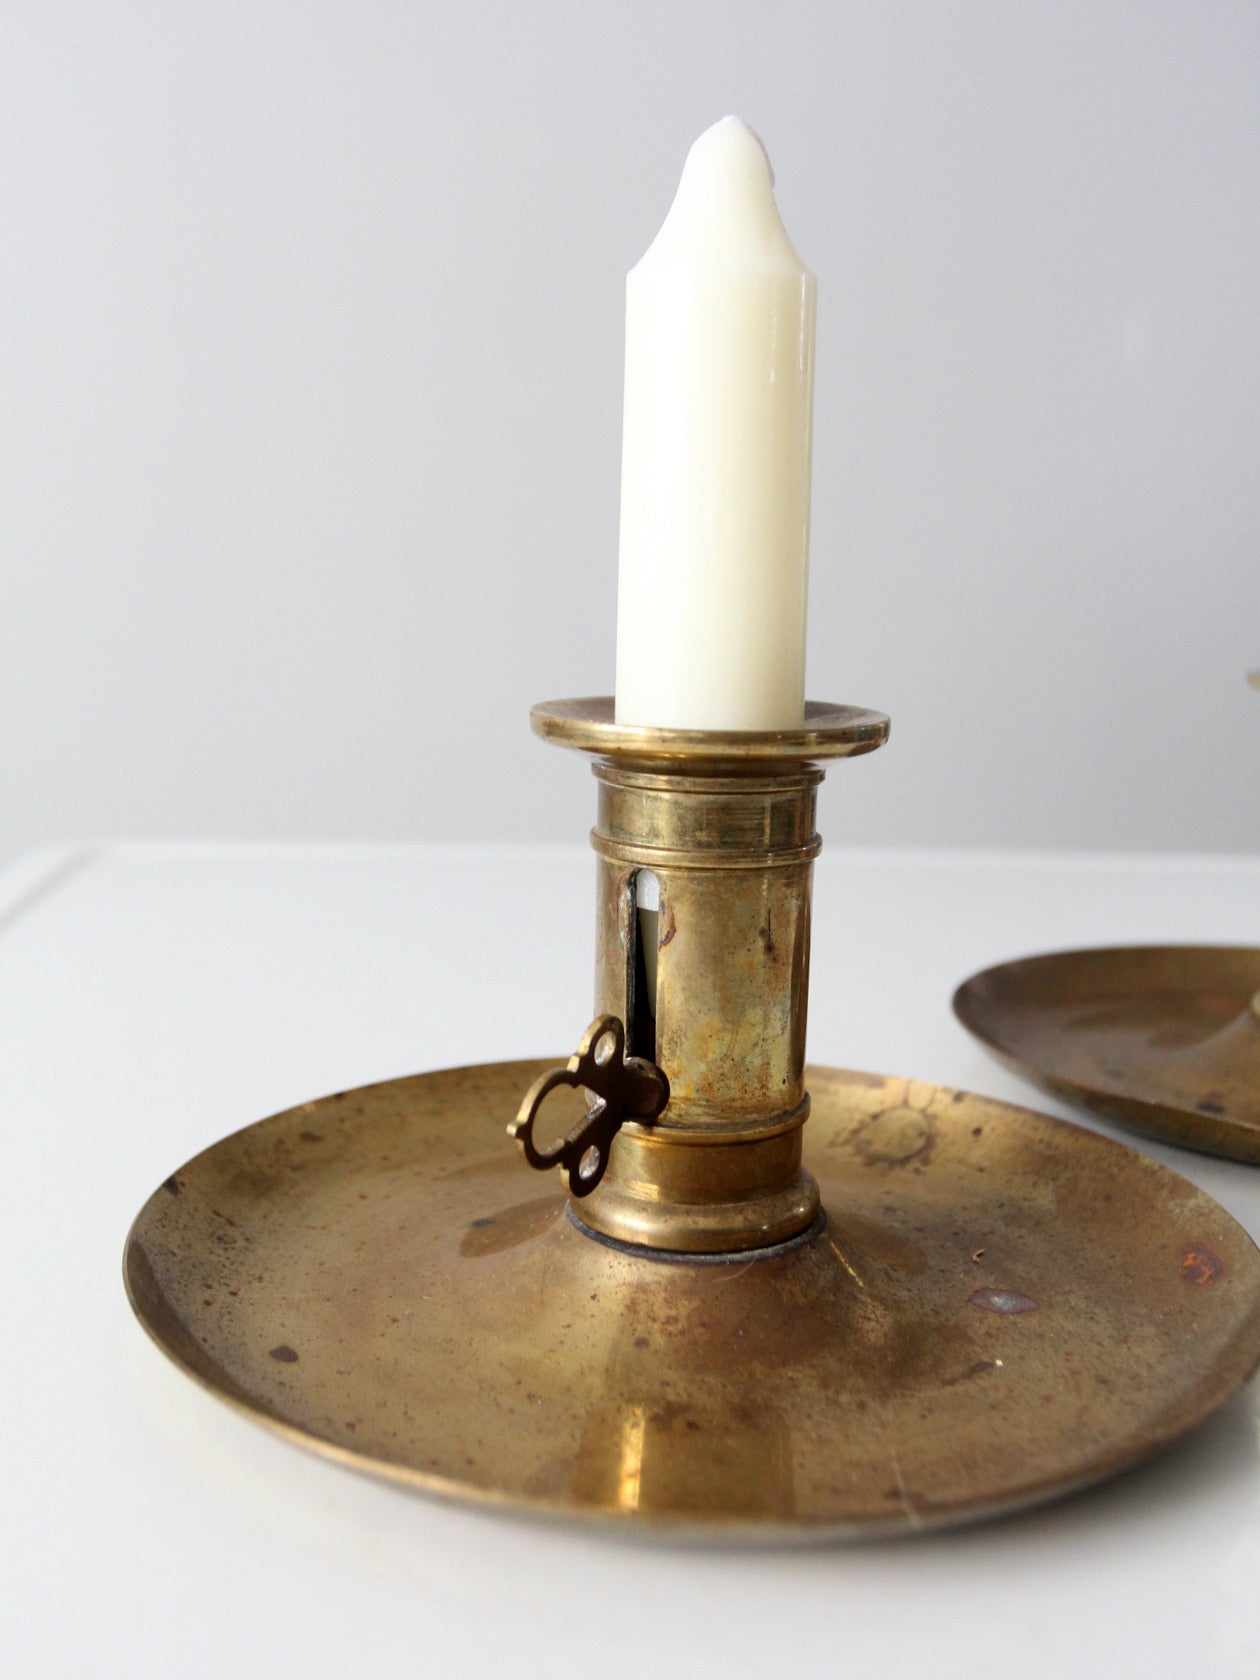 Great antique brass push up candlestick